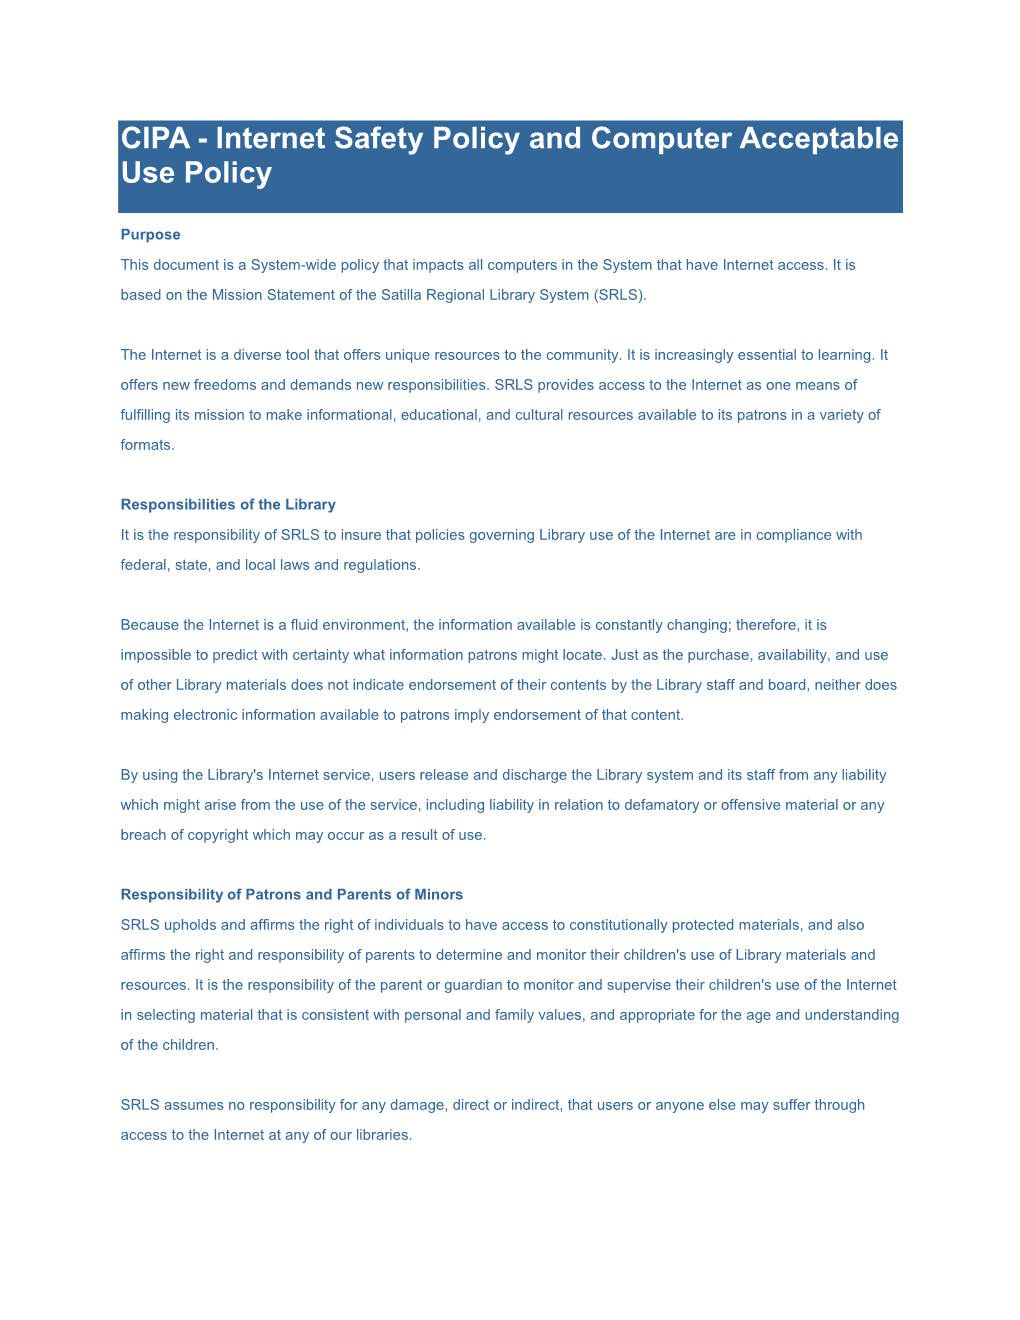 CIPA - Internet Safety Policy and Computer Acceptable Use Policy